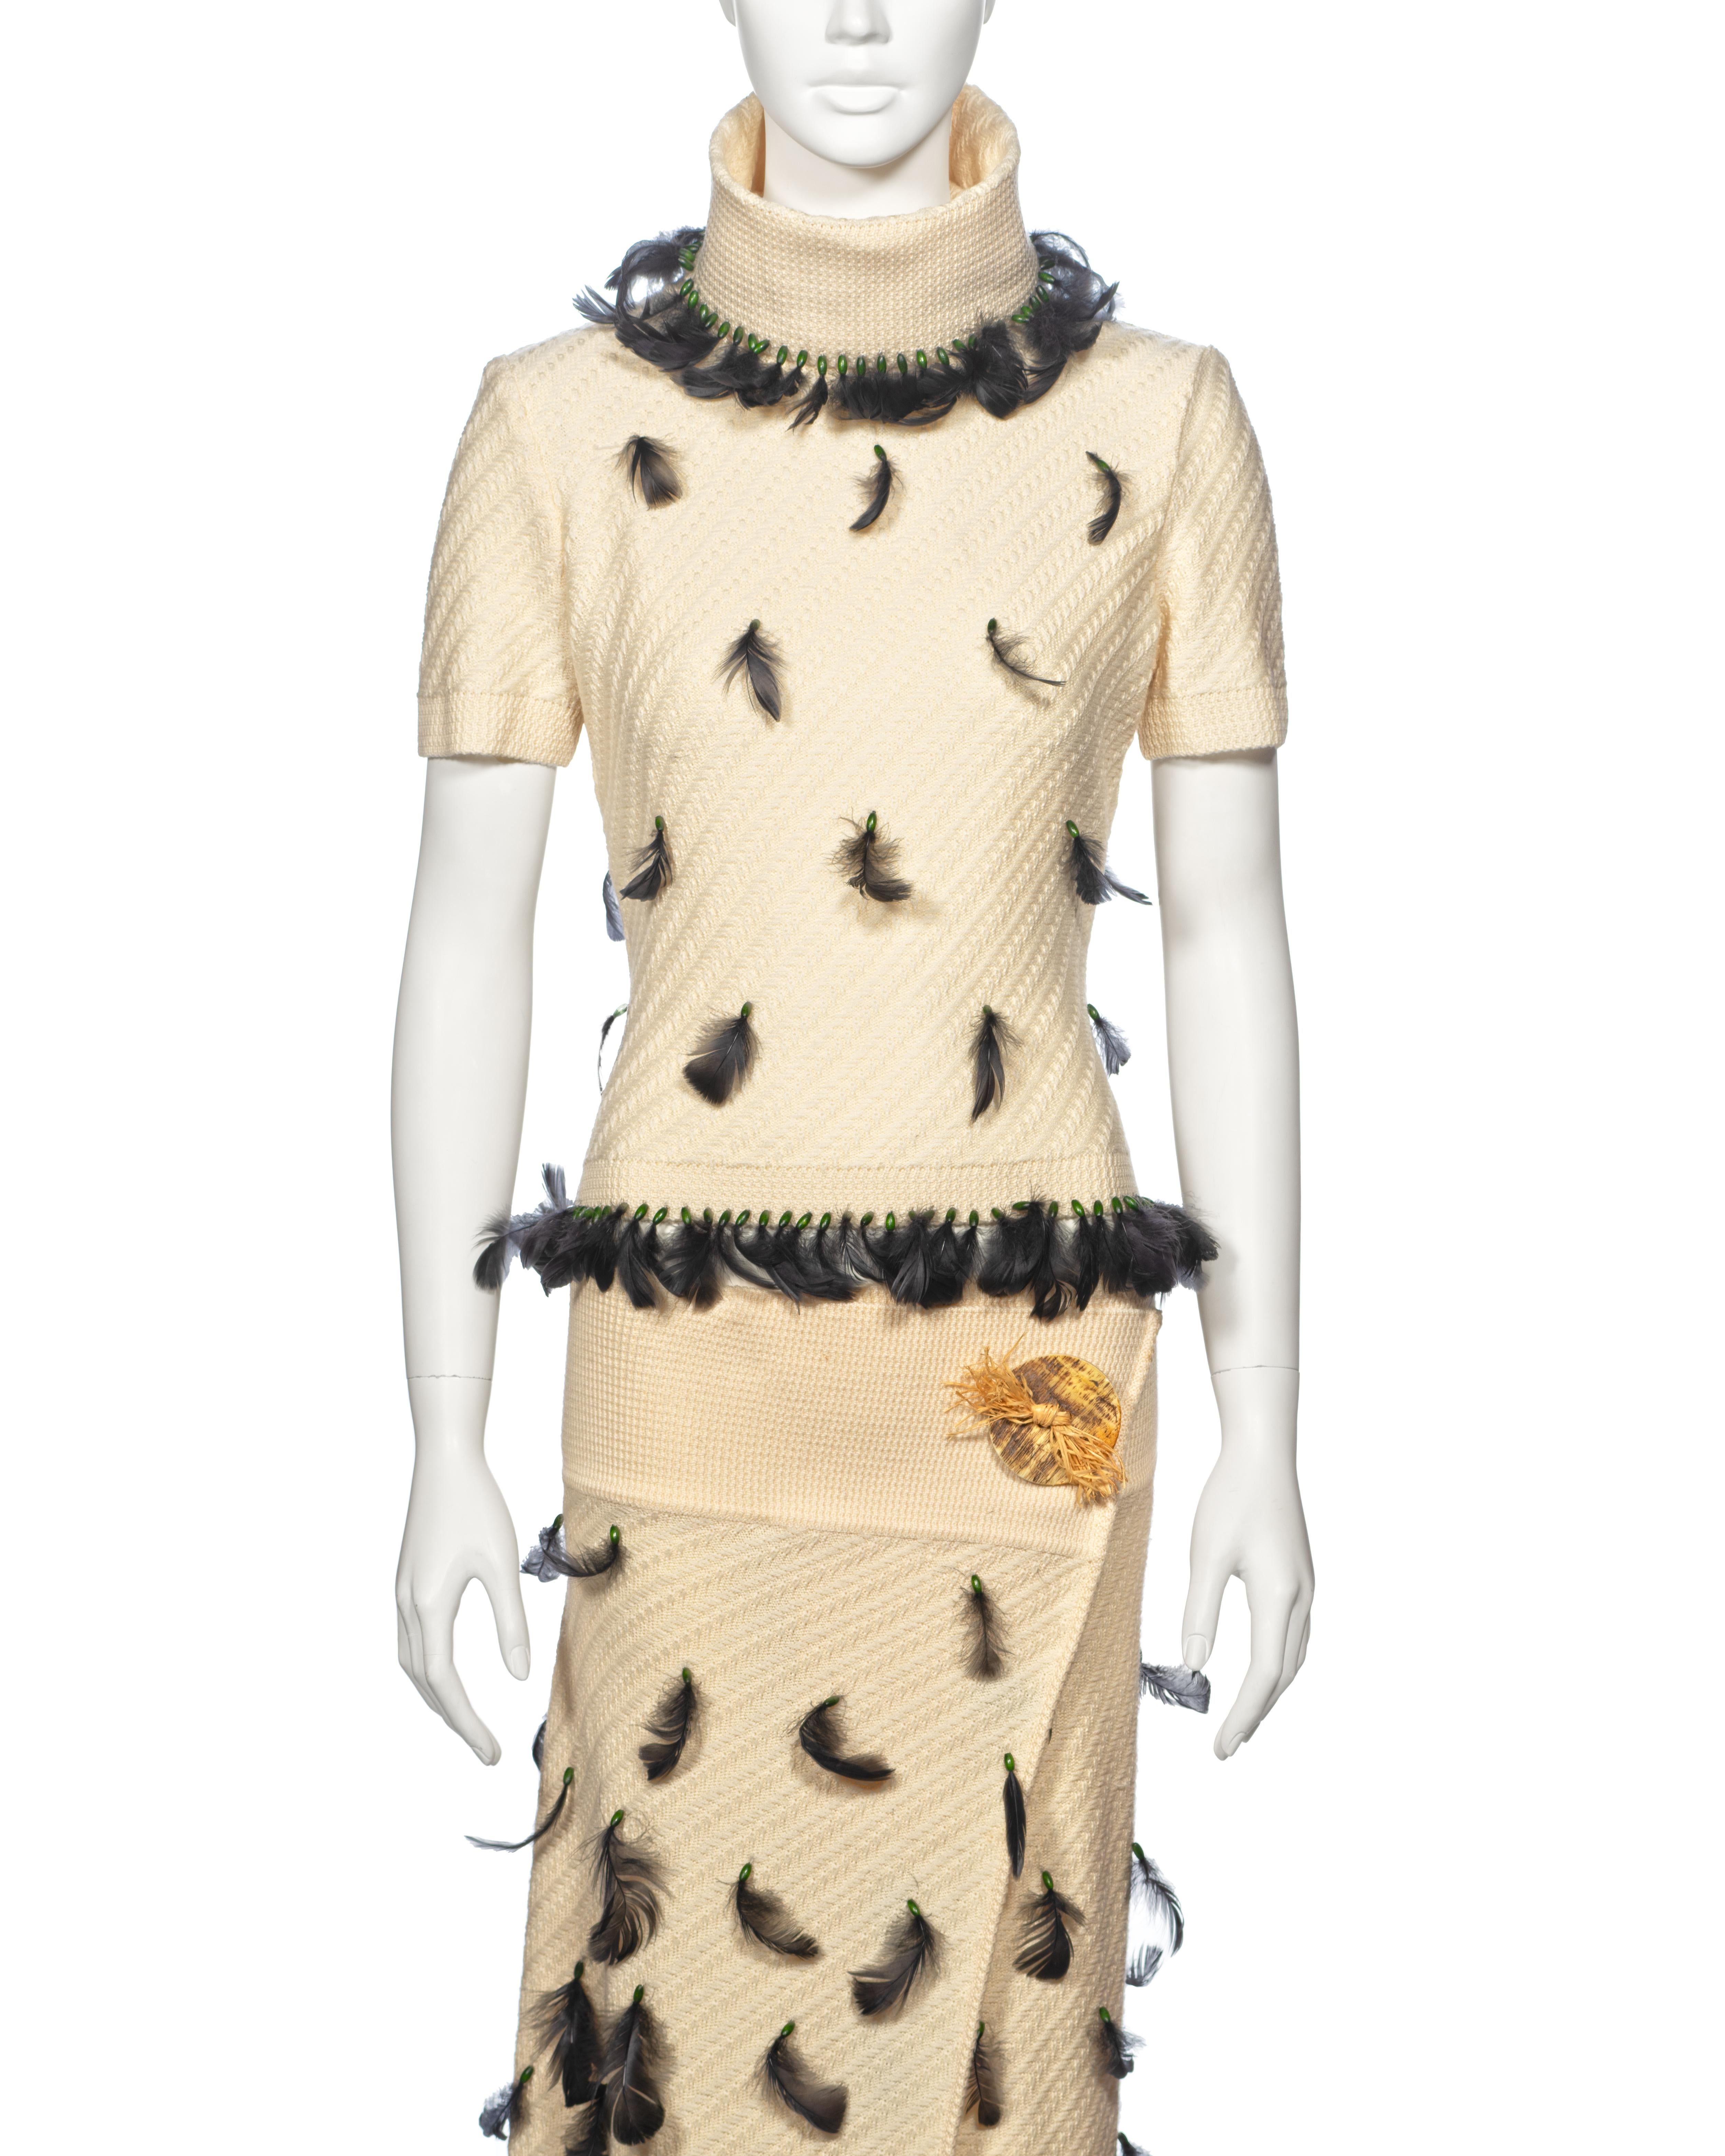 Women's John Galliano Cream Knitted Skirt Suit Adorned With Black Feathers, fw 1999 For Sale